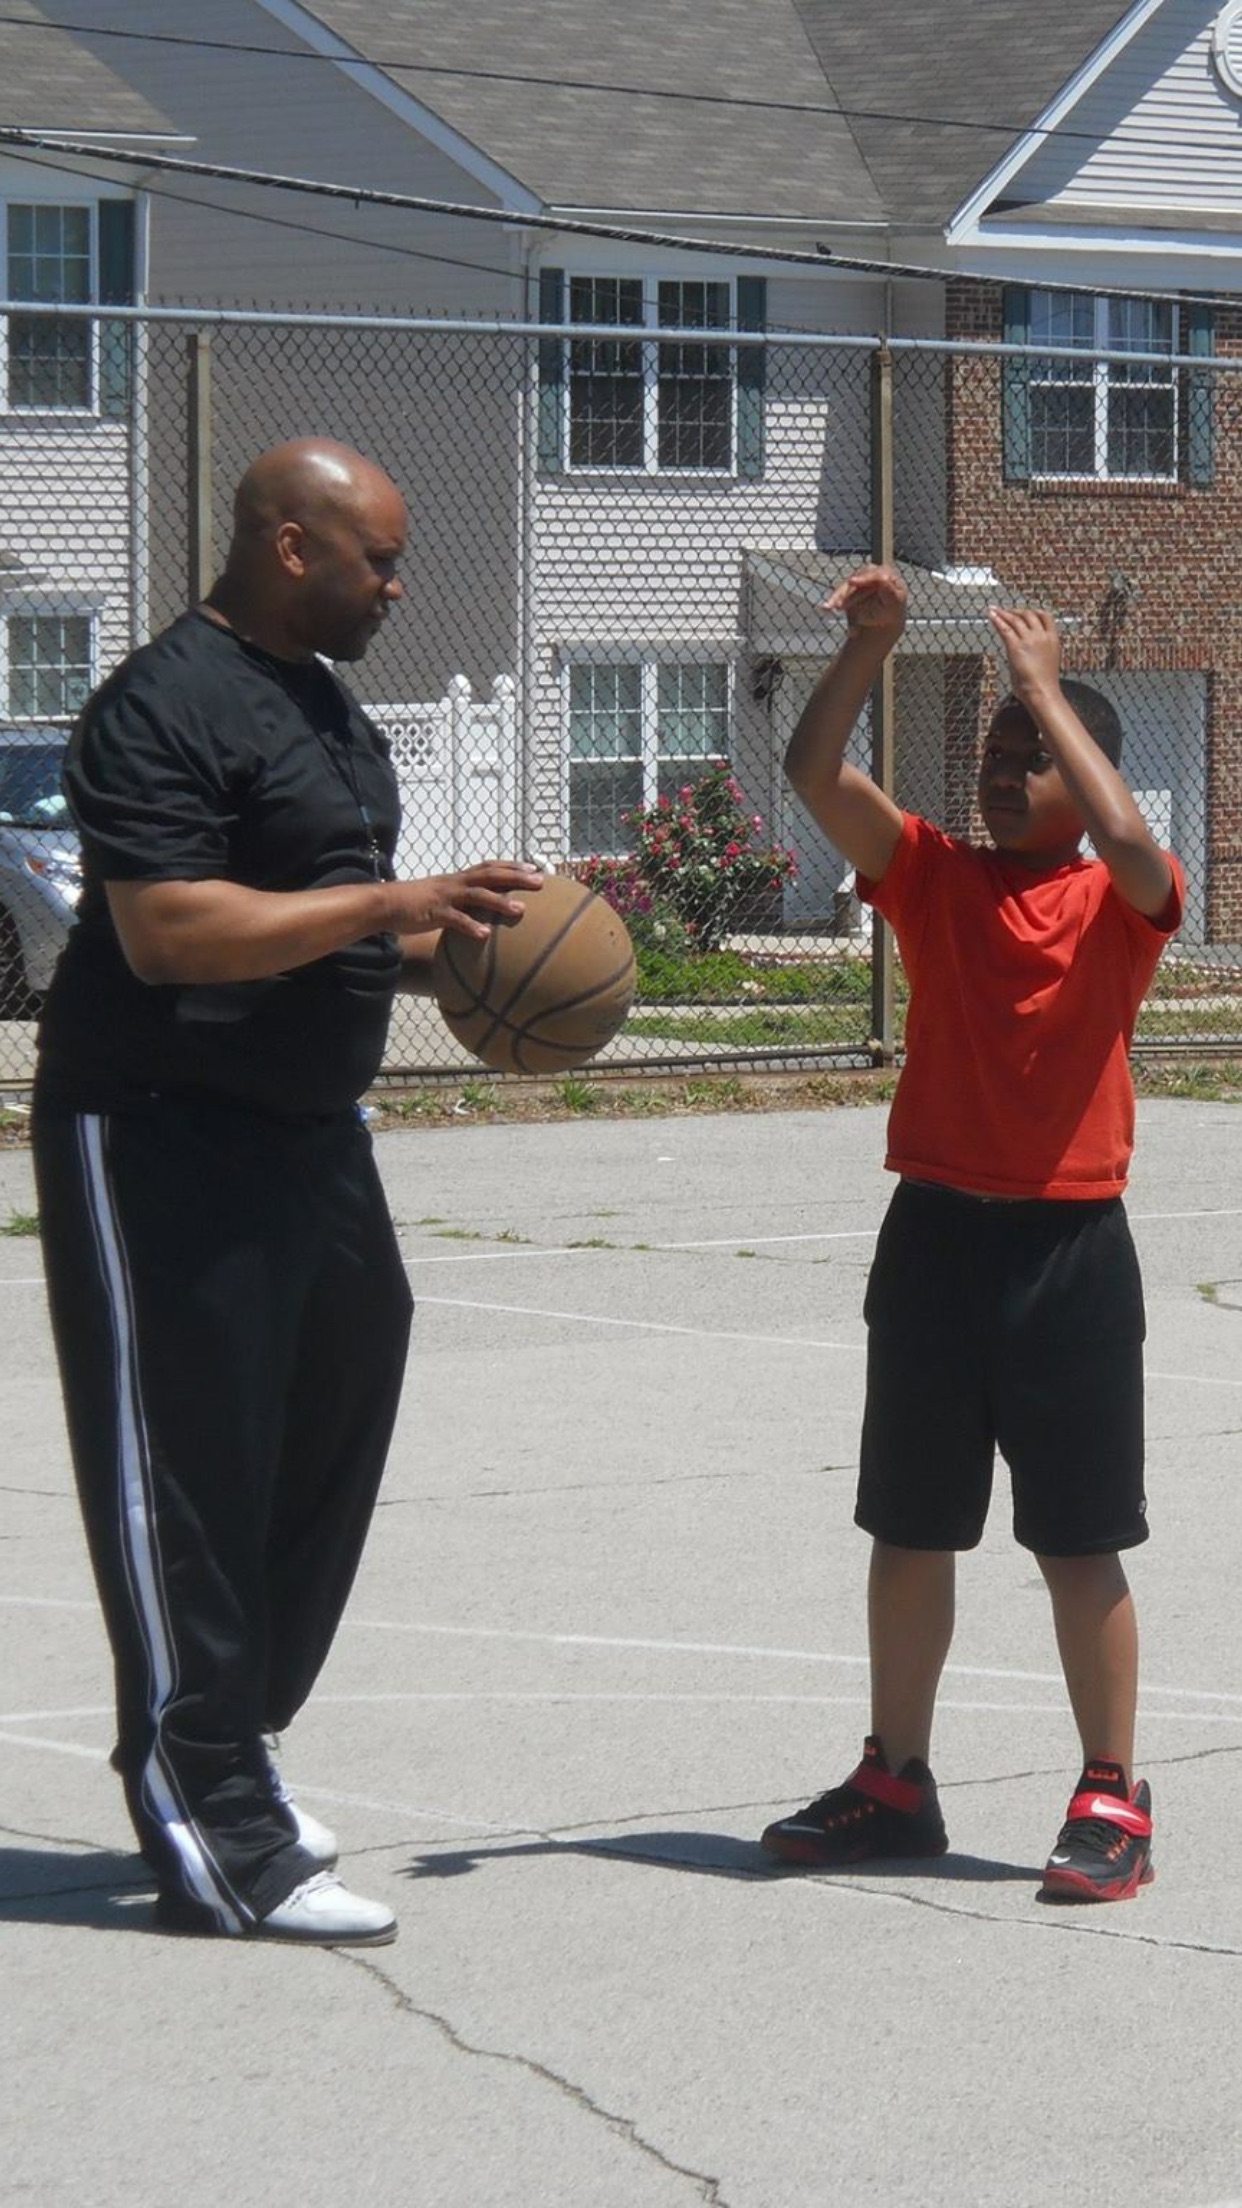 Coach George Schooling young Rome to be great. Boston2Philly